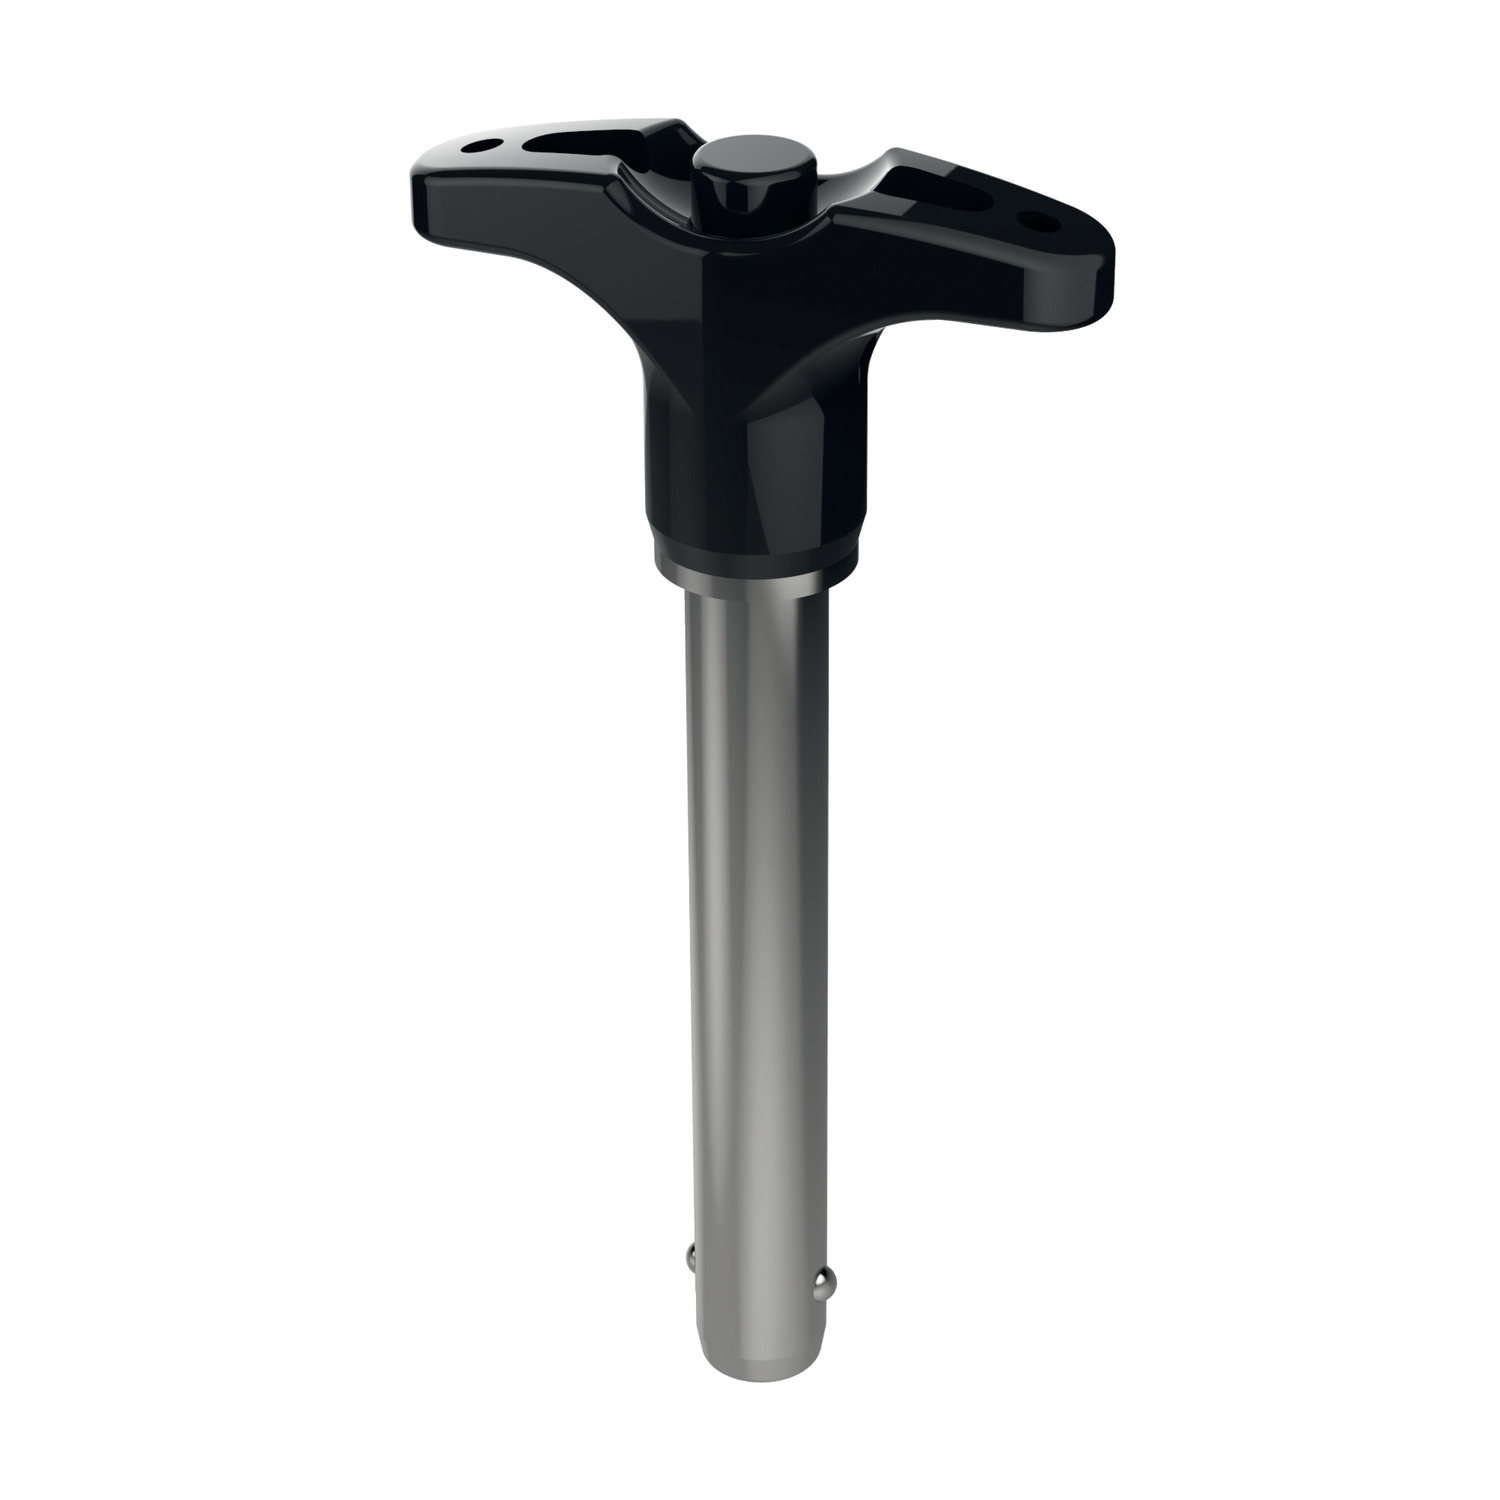 Ball Lock Pins - Single Acting - T-Handle Single Acting T-Handle ball lock pins quick fastening and locking of frequently repeated connections. Handle offers confidence in handling and installation. To see more of our popular ball lock pins, visit this page.